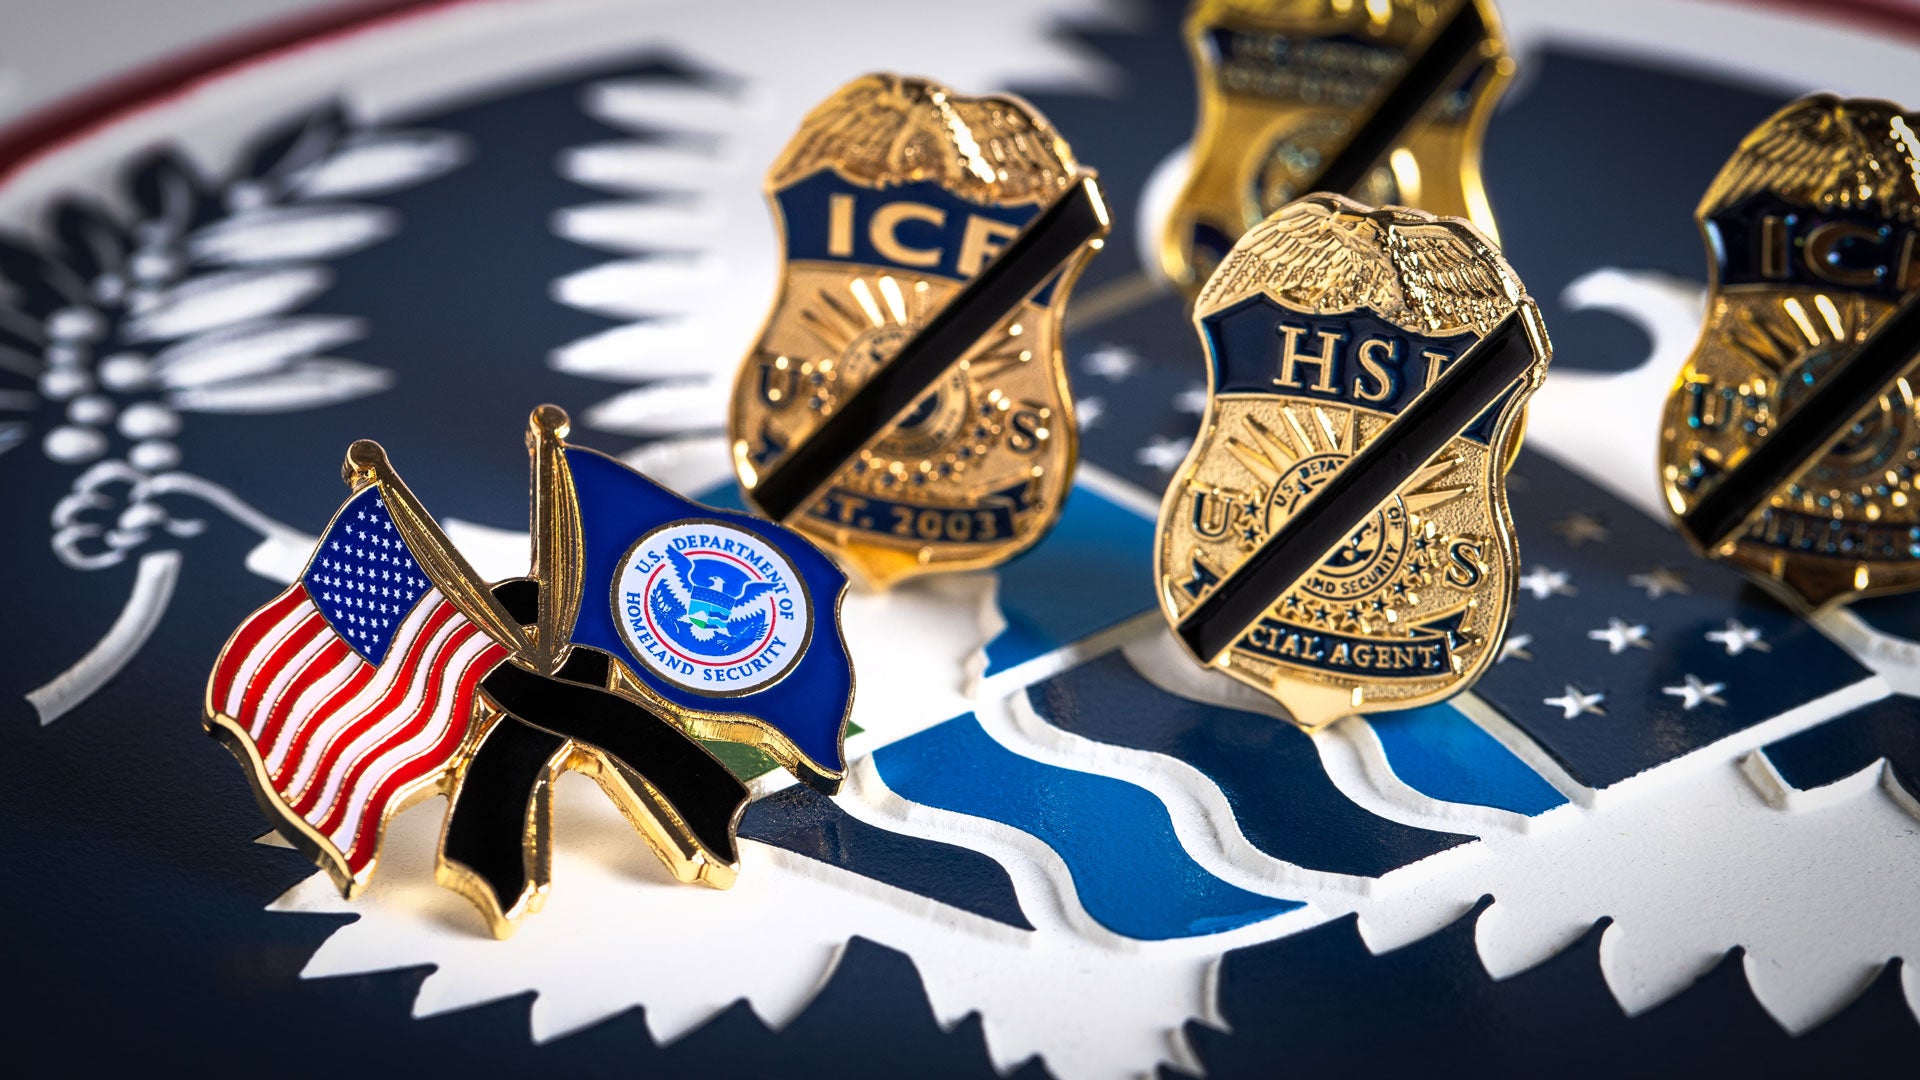 A collection of custom pins, badges and emblems for the US government